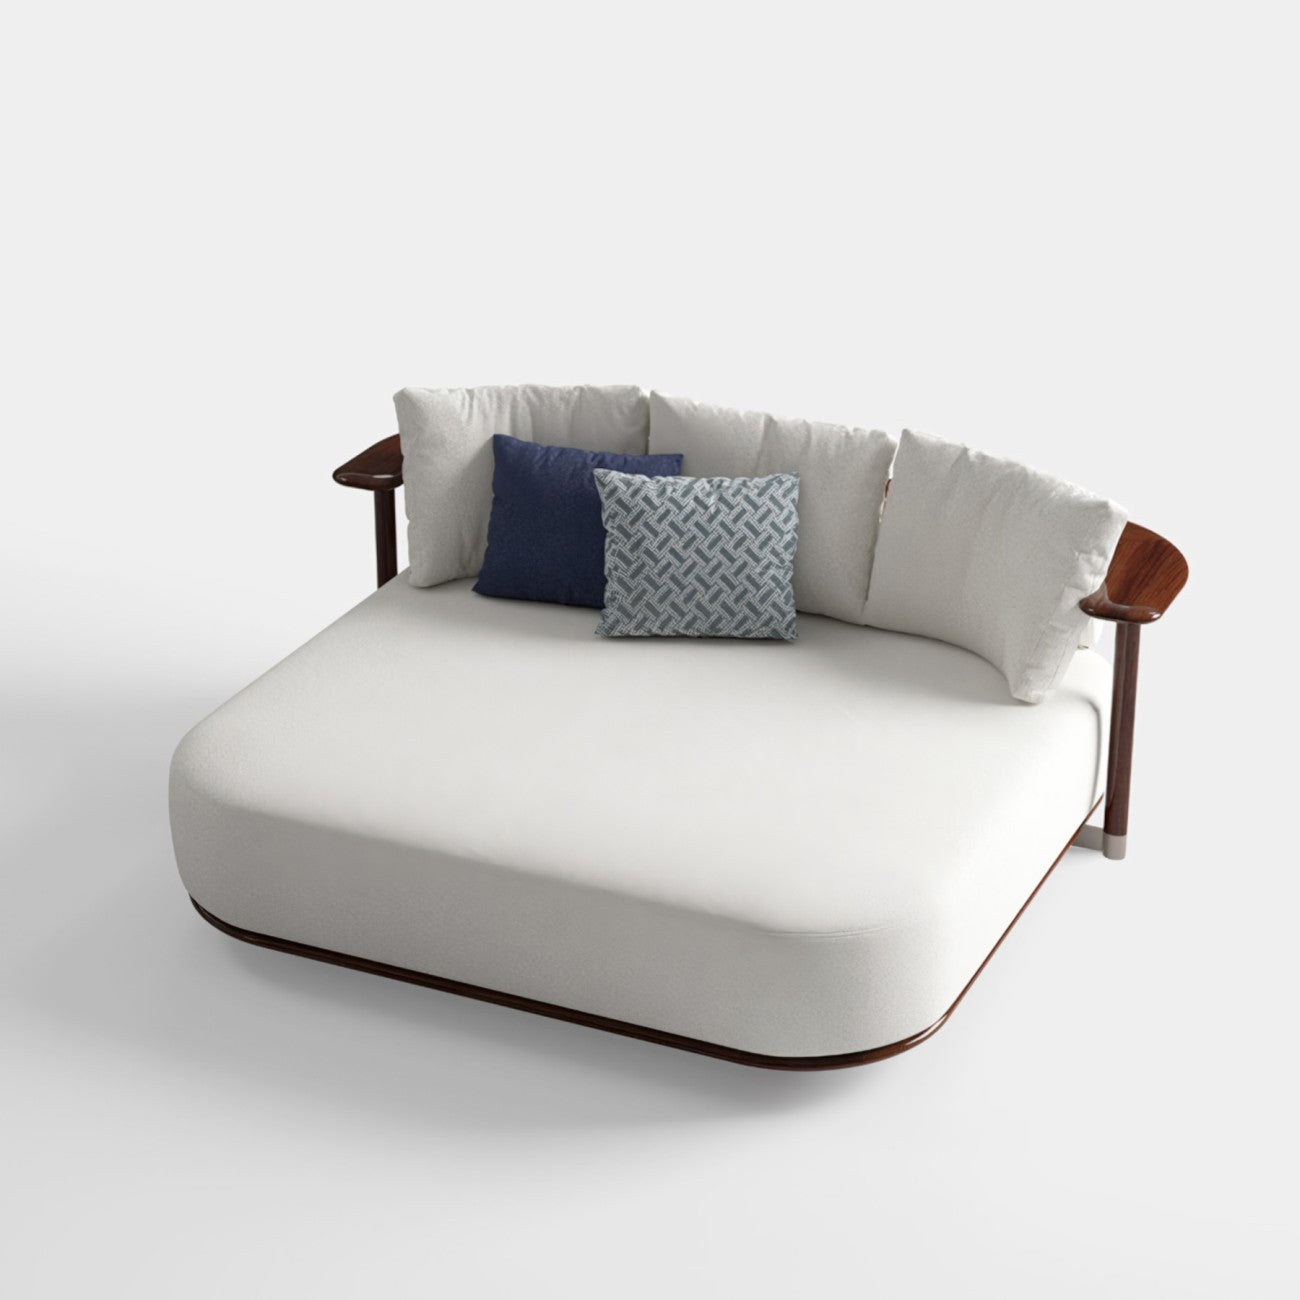 CPRN HOMOOD OUTDOOR | Pedro Daybed - $35,559.00